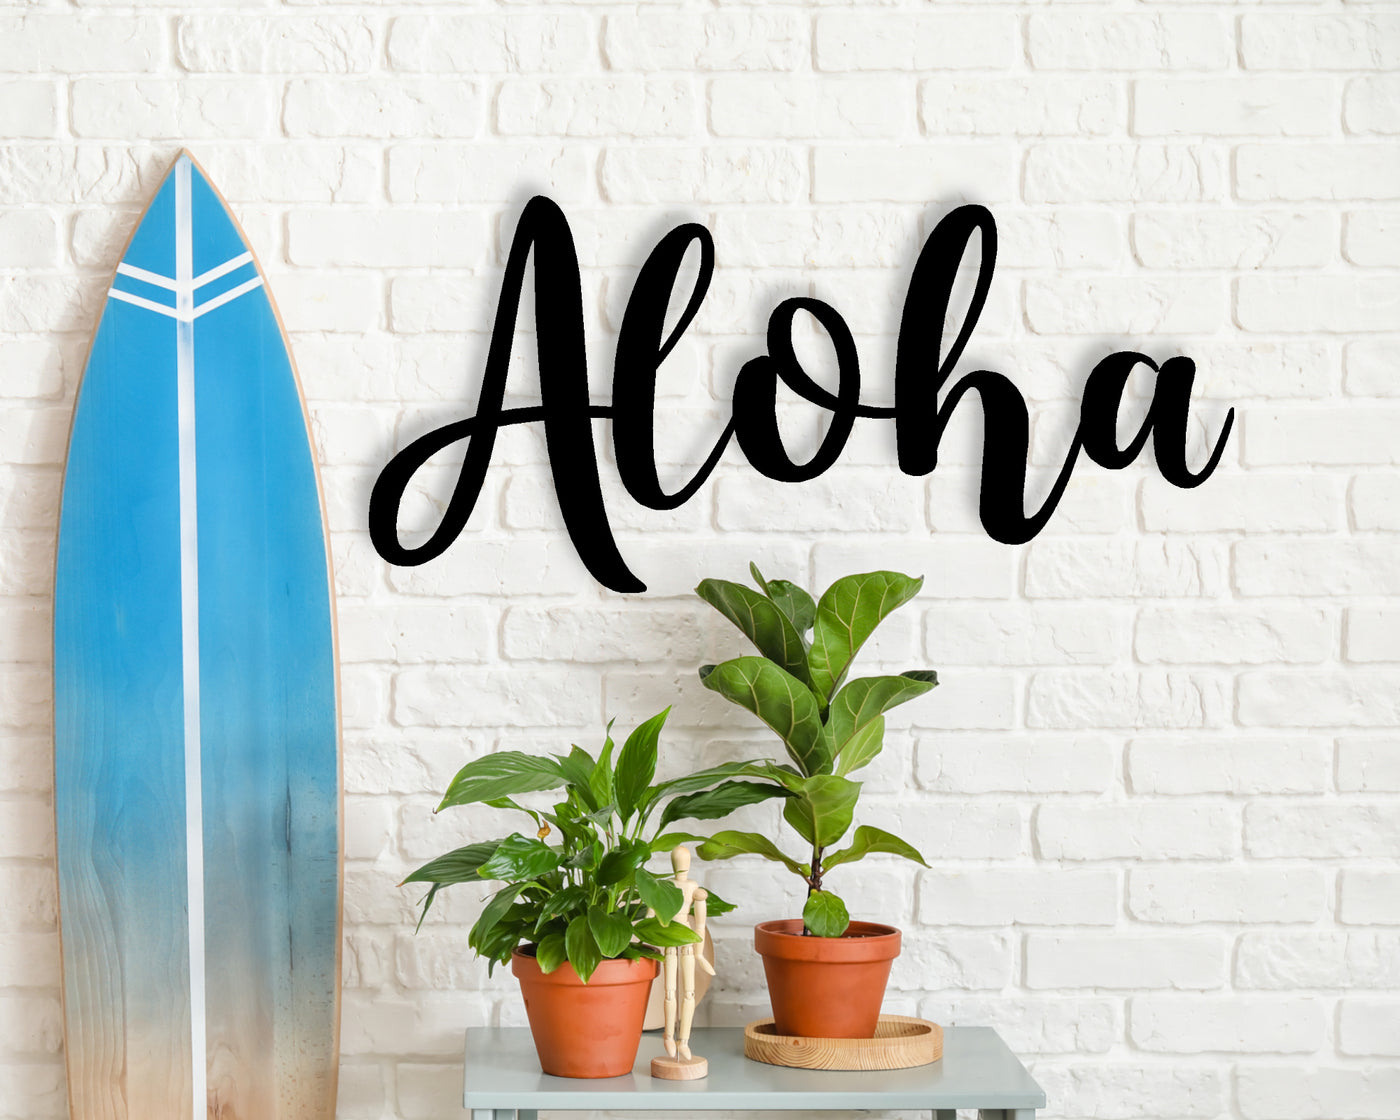 Aloha Metal Word Sign - Madison Iron and Wood - Wall Art - metal outdoor decor - Steel deocrations - american made products - veteran owned business products - fencing decorations - fencing supplies - custom wall decorations - personalized wall signs - steel - decorative post caps - steel post caps - metal post caps - brackets - structural brackets - home improvement - easter - easter decorations - easter gift - easter yard decor